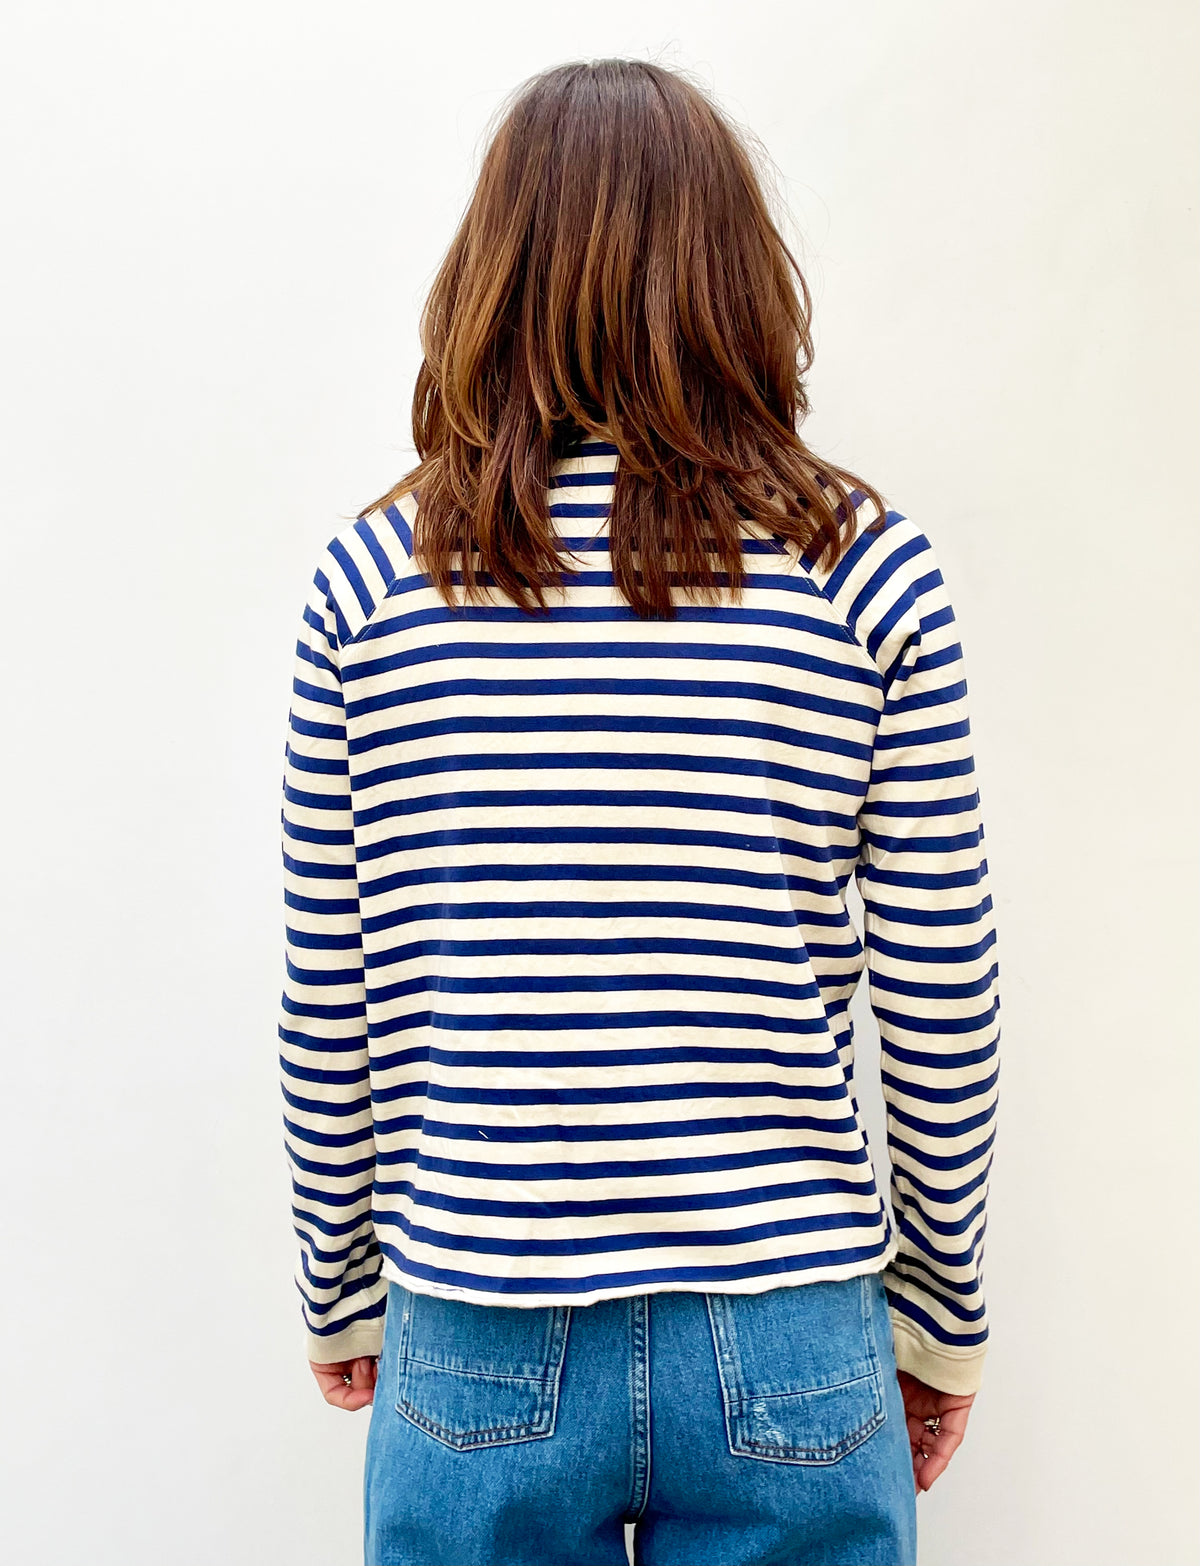 L&H Seany Striped Top in Tahitian Off White